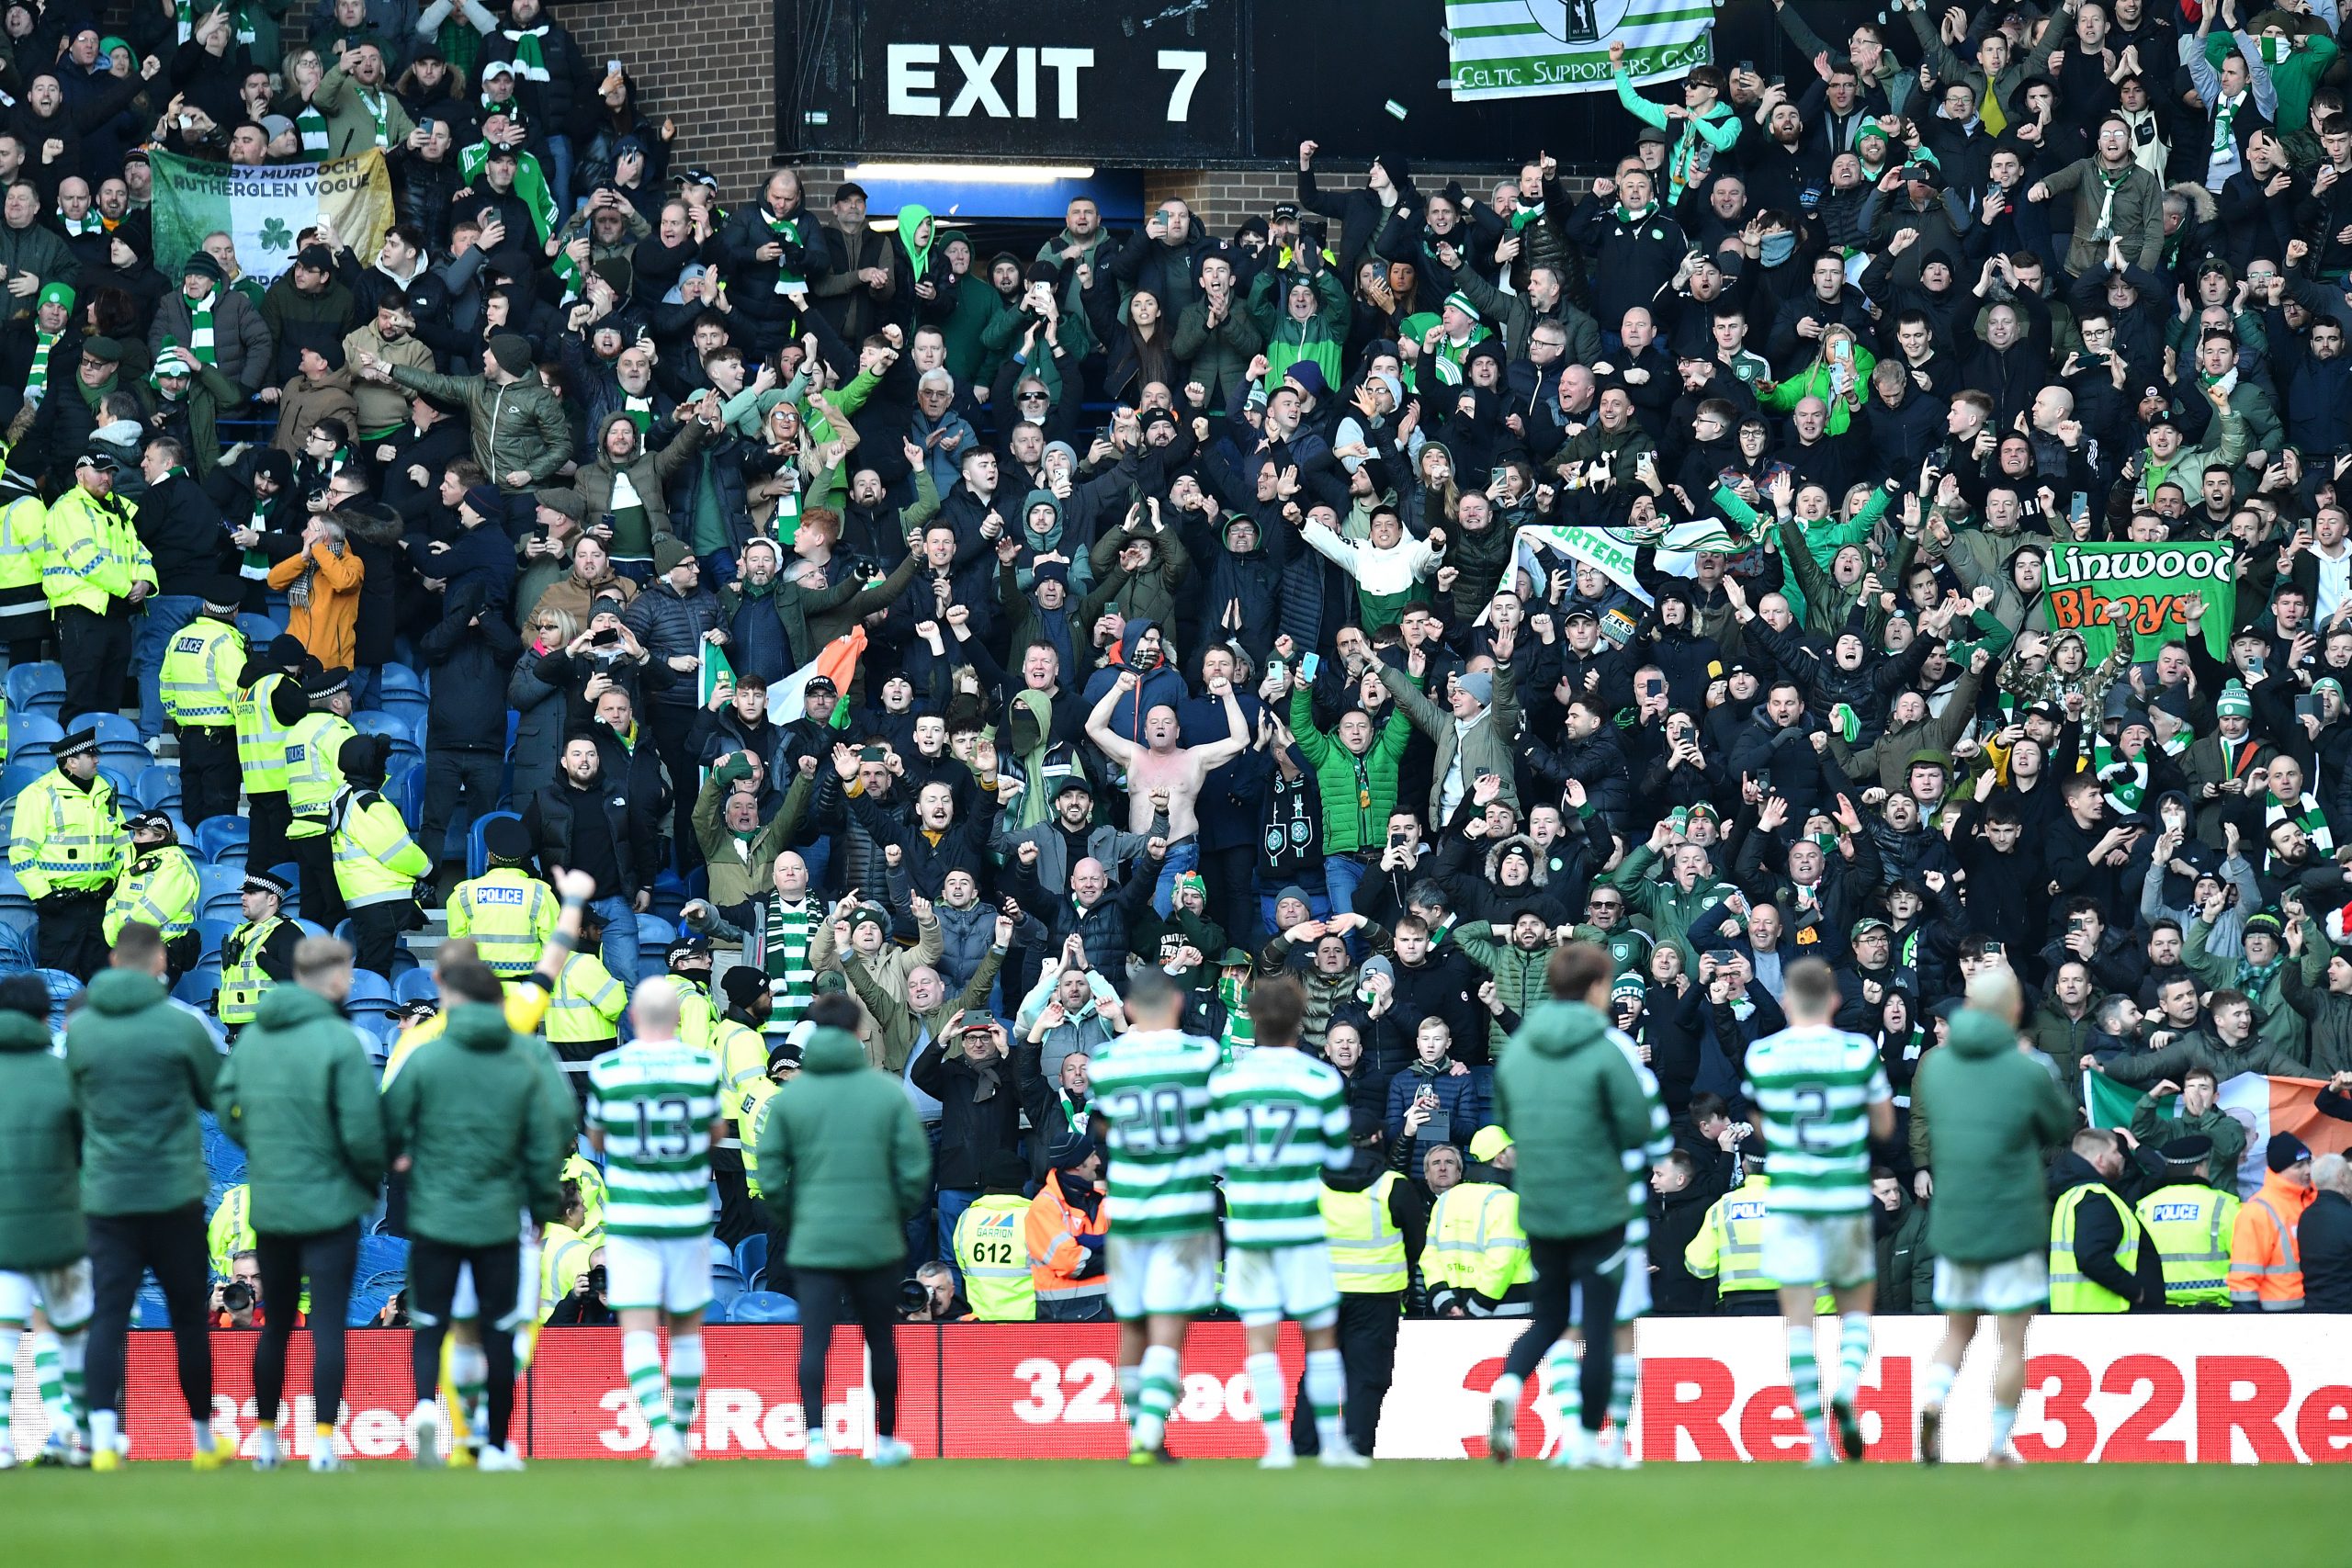 Celtic players applauding the Celtic fans in an Old Firm